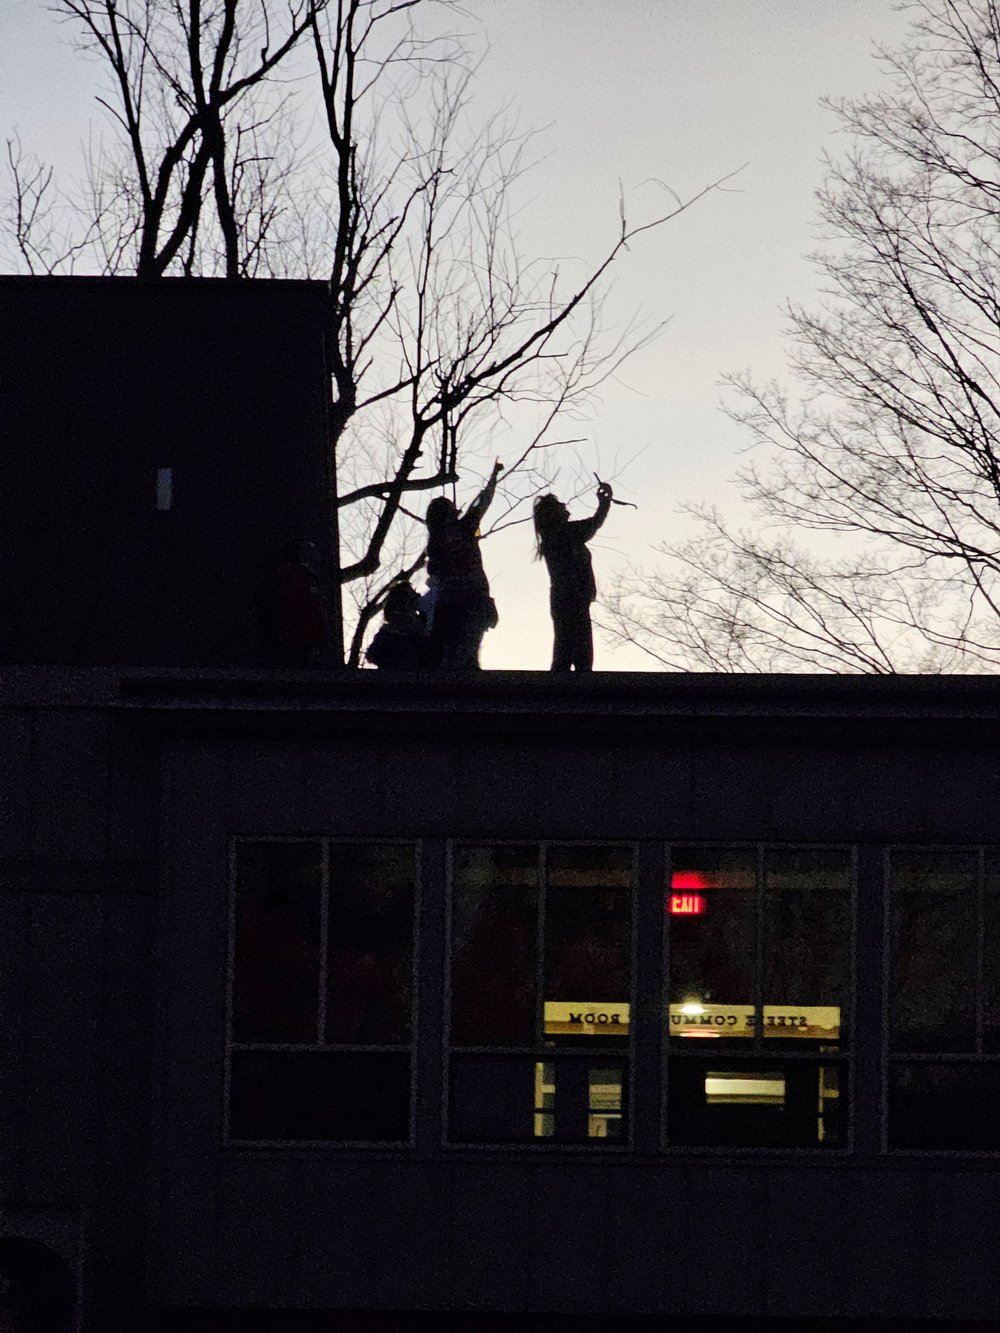   Richard Drill captured this scene of people atop the municipal offices in Waterbury.   